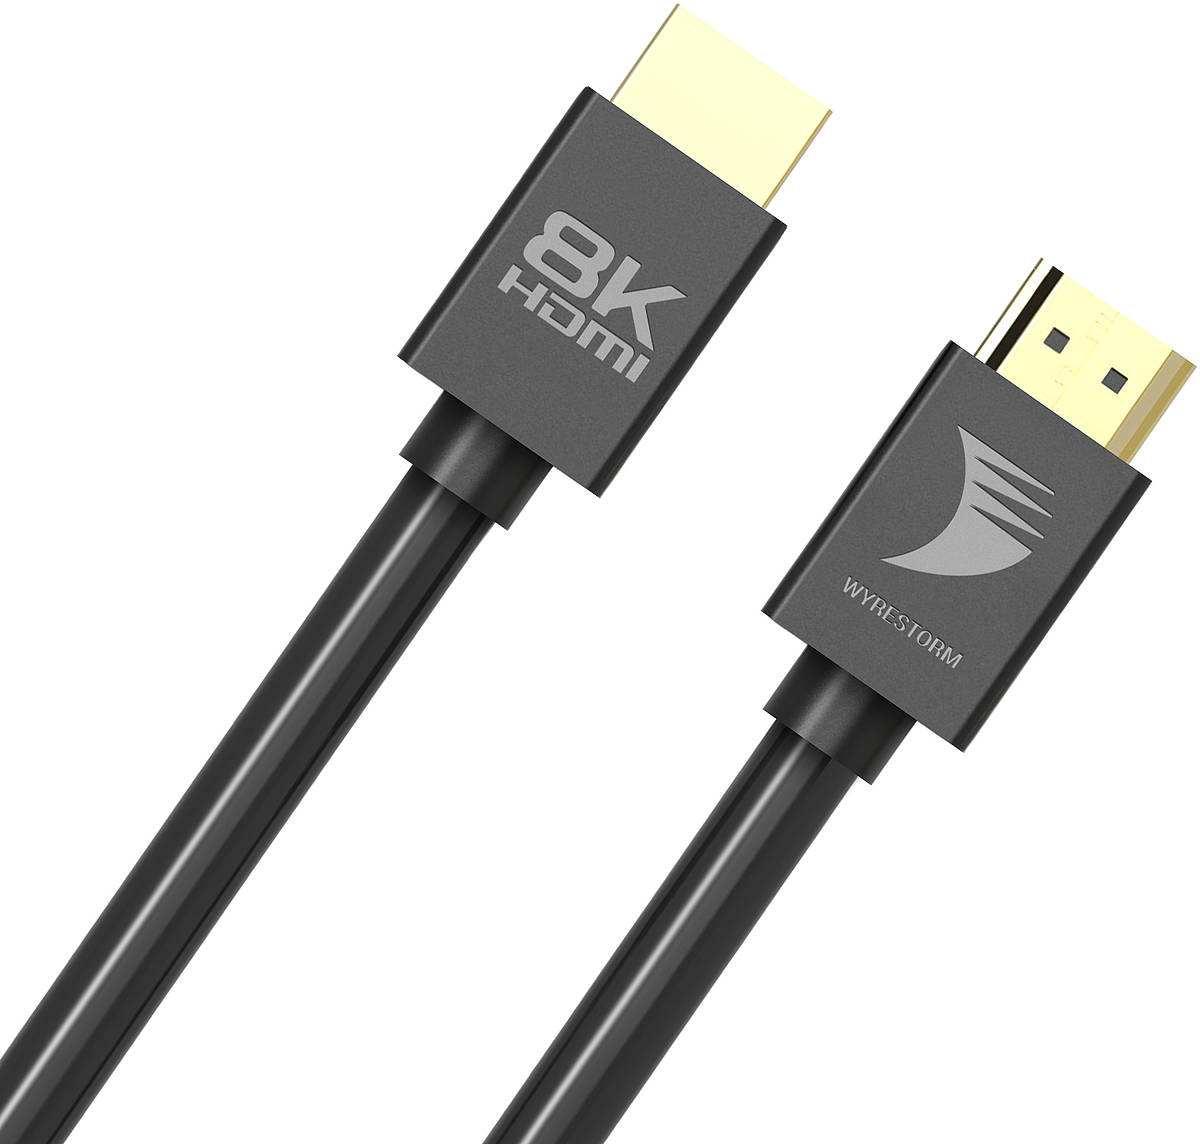 EXP-HDMI-0.5M-8K 0.50m WyreStorm 8K 60 HDMI 2.1 cable product image. Click to enlarge.